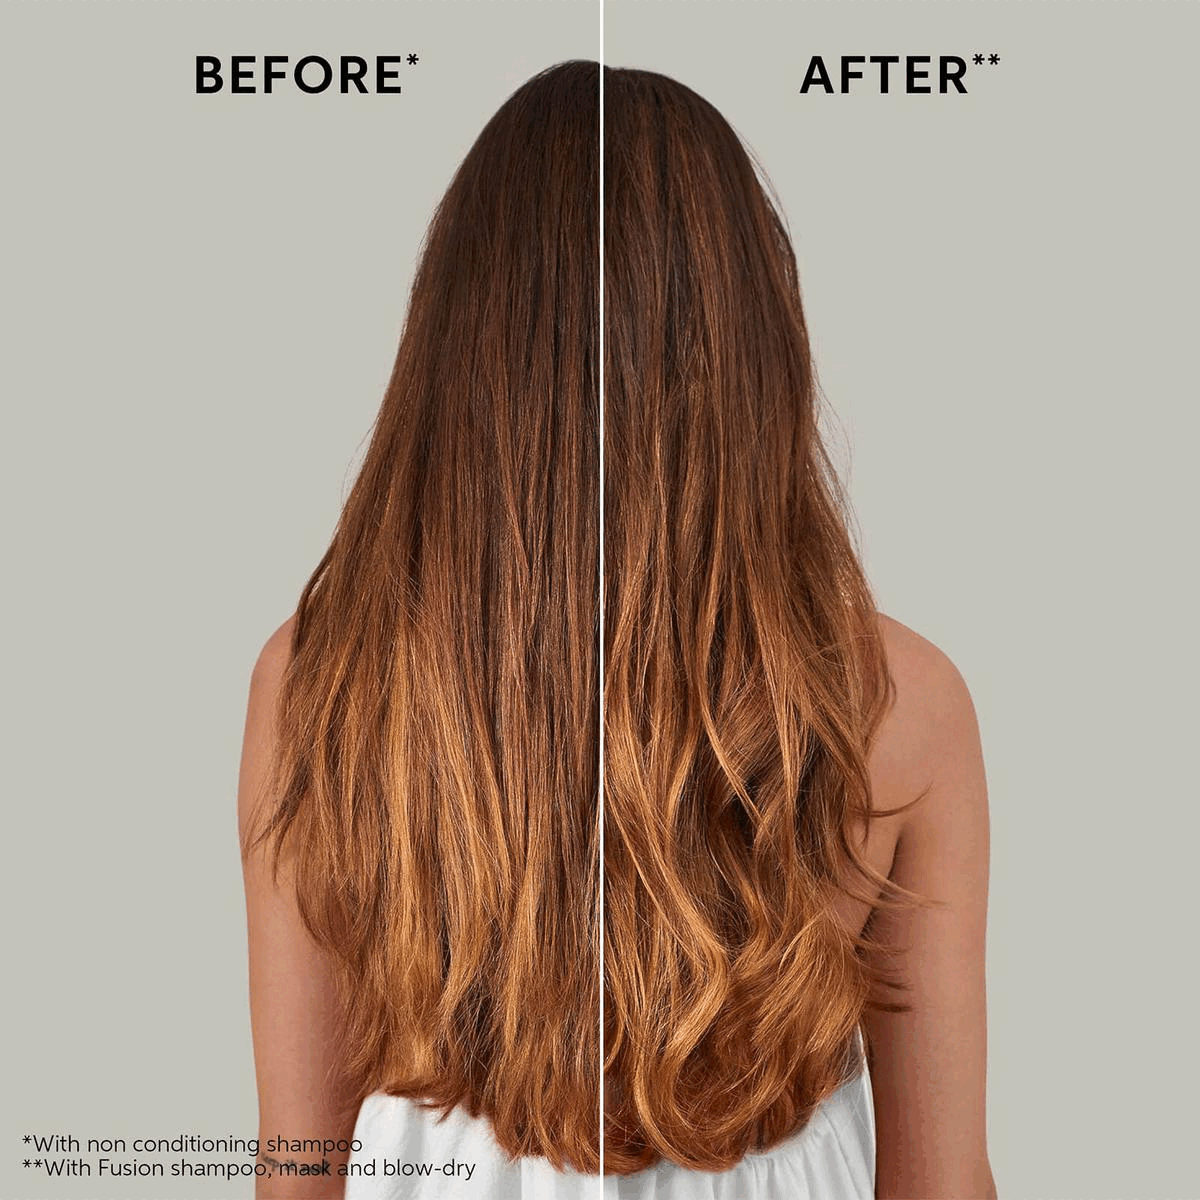 Image 1-Before - frizzy* After - smooth**  *with non conditioning shampoo **with Fusion shampoo mask and blow dry. Image 2-Instantly helps to protect against breakage.Image 3-How it works, 1. For damaged hair, 2. Effect inside hair,3. Effect outside hair